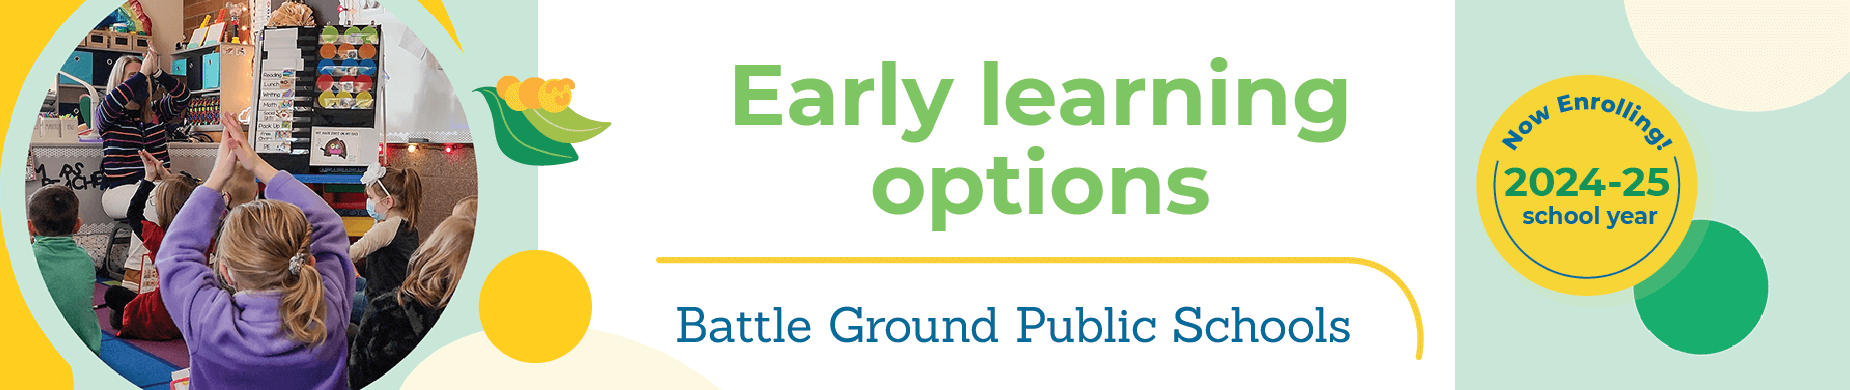 early learning options